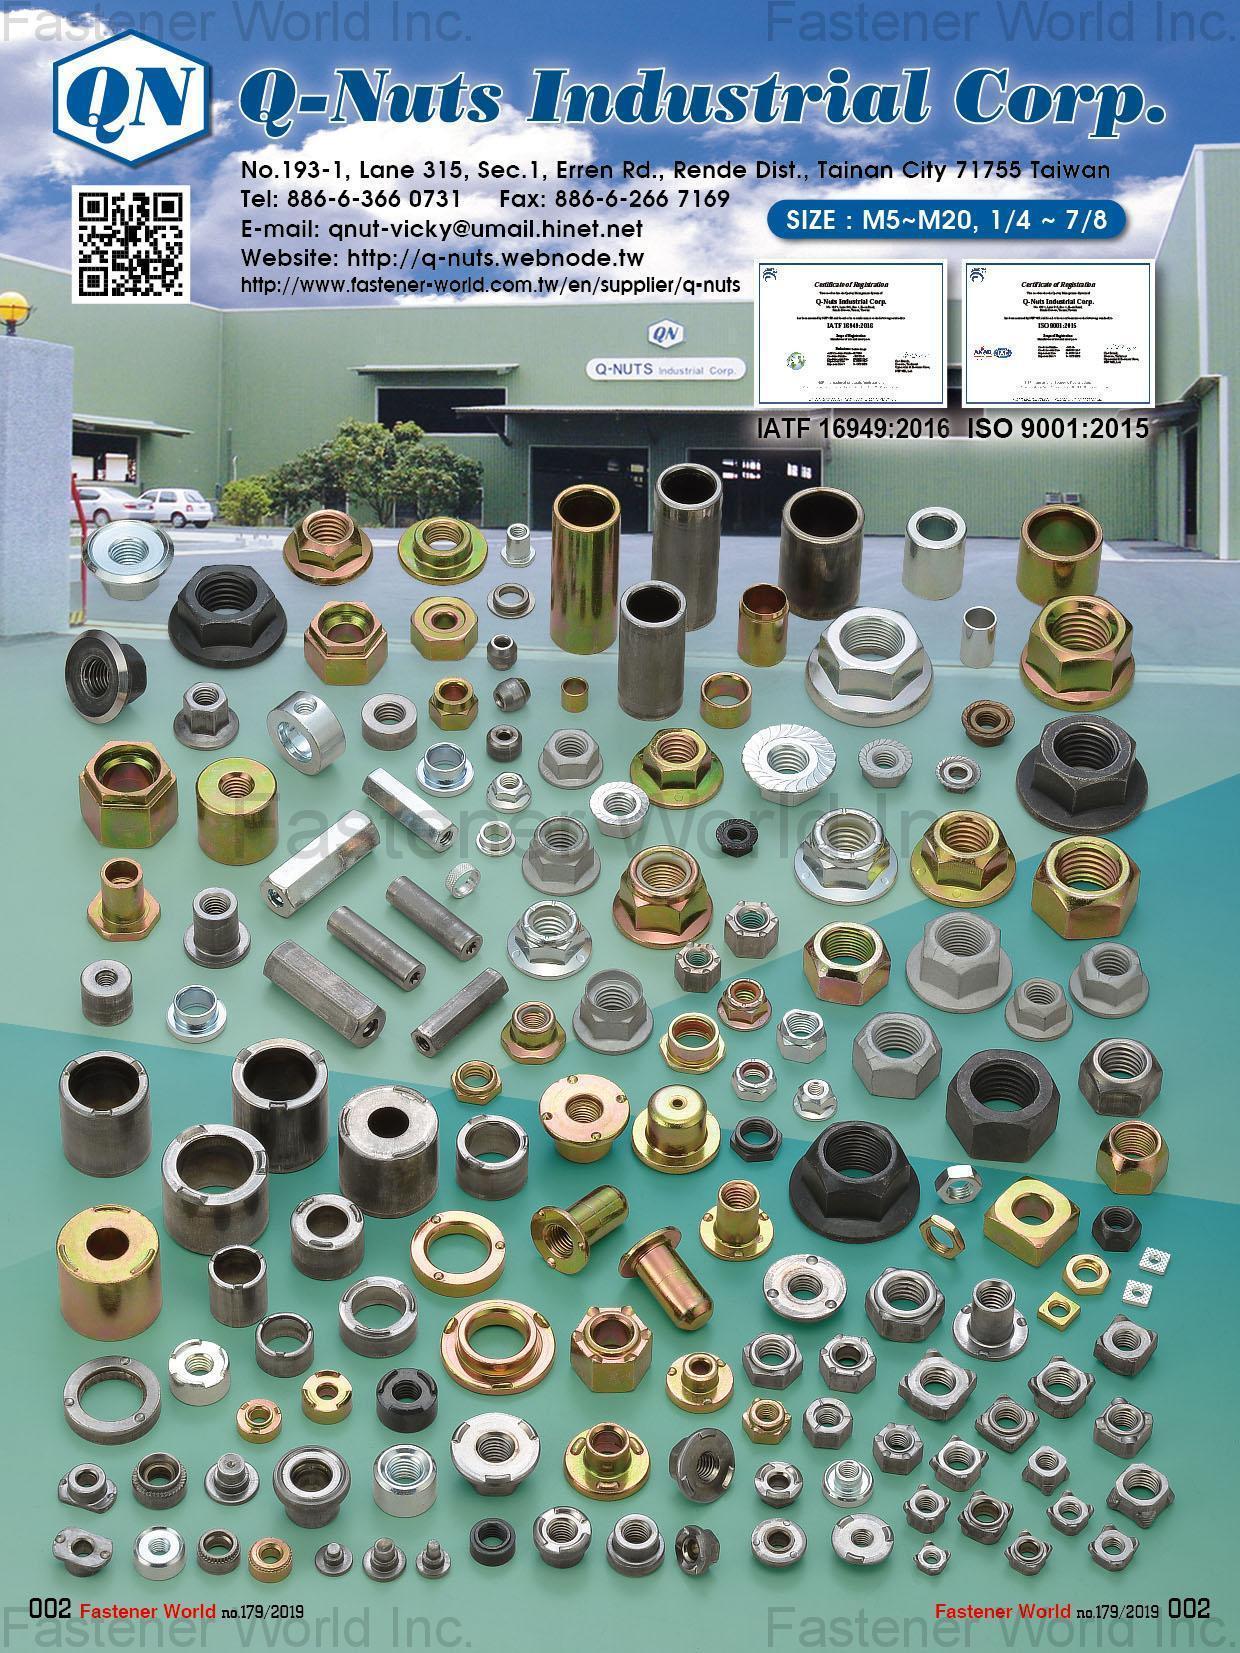 Q-NUTS INDUSTRIAL CORP. , Flange Nuts, Weld Nuts, Special Nuts, Spacers , Flange Nuts